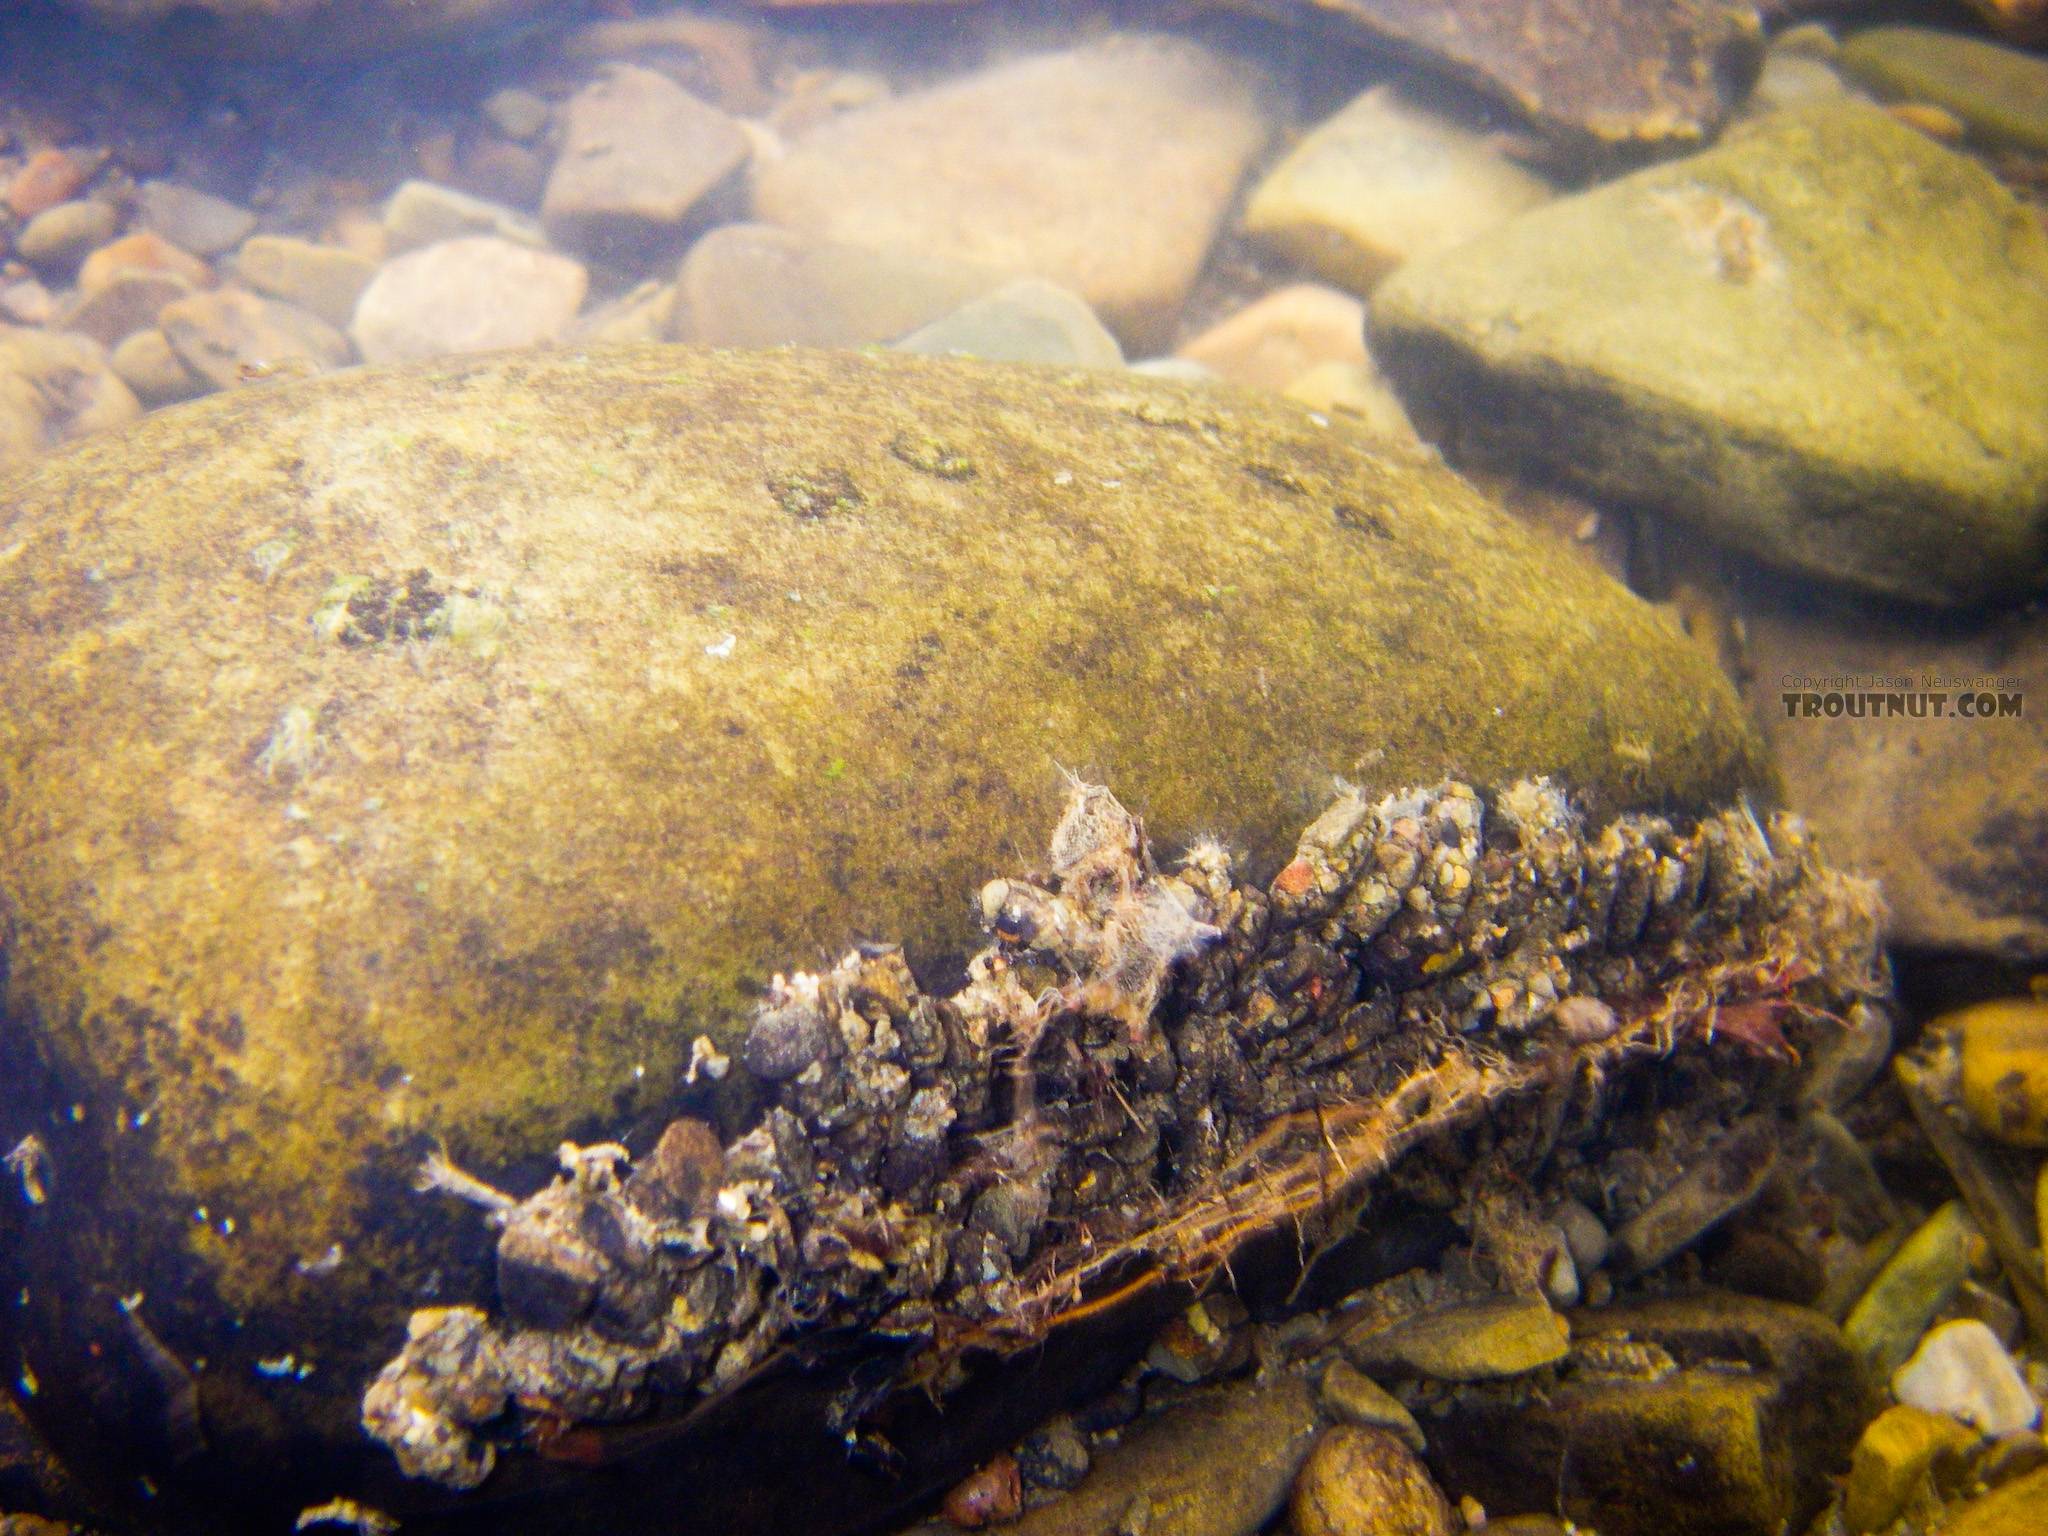 A wide variety of caddis larvae and other insects have clustered together on the backside of this rock in fast water.  In this picture: Caddisfly Genus Neophylax (Autumn Mottled Sedges). From Cayuta Creek in New York.